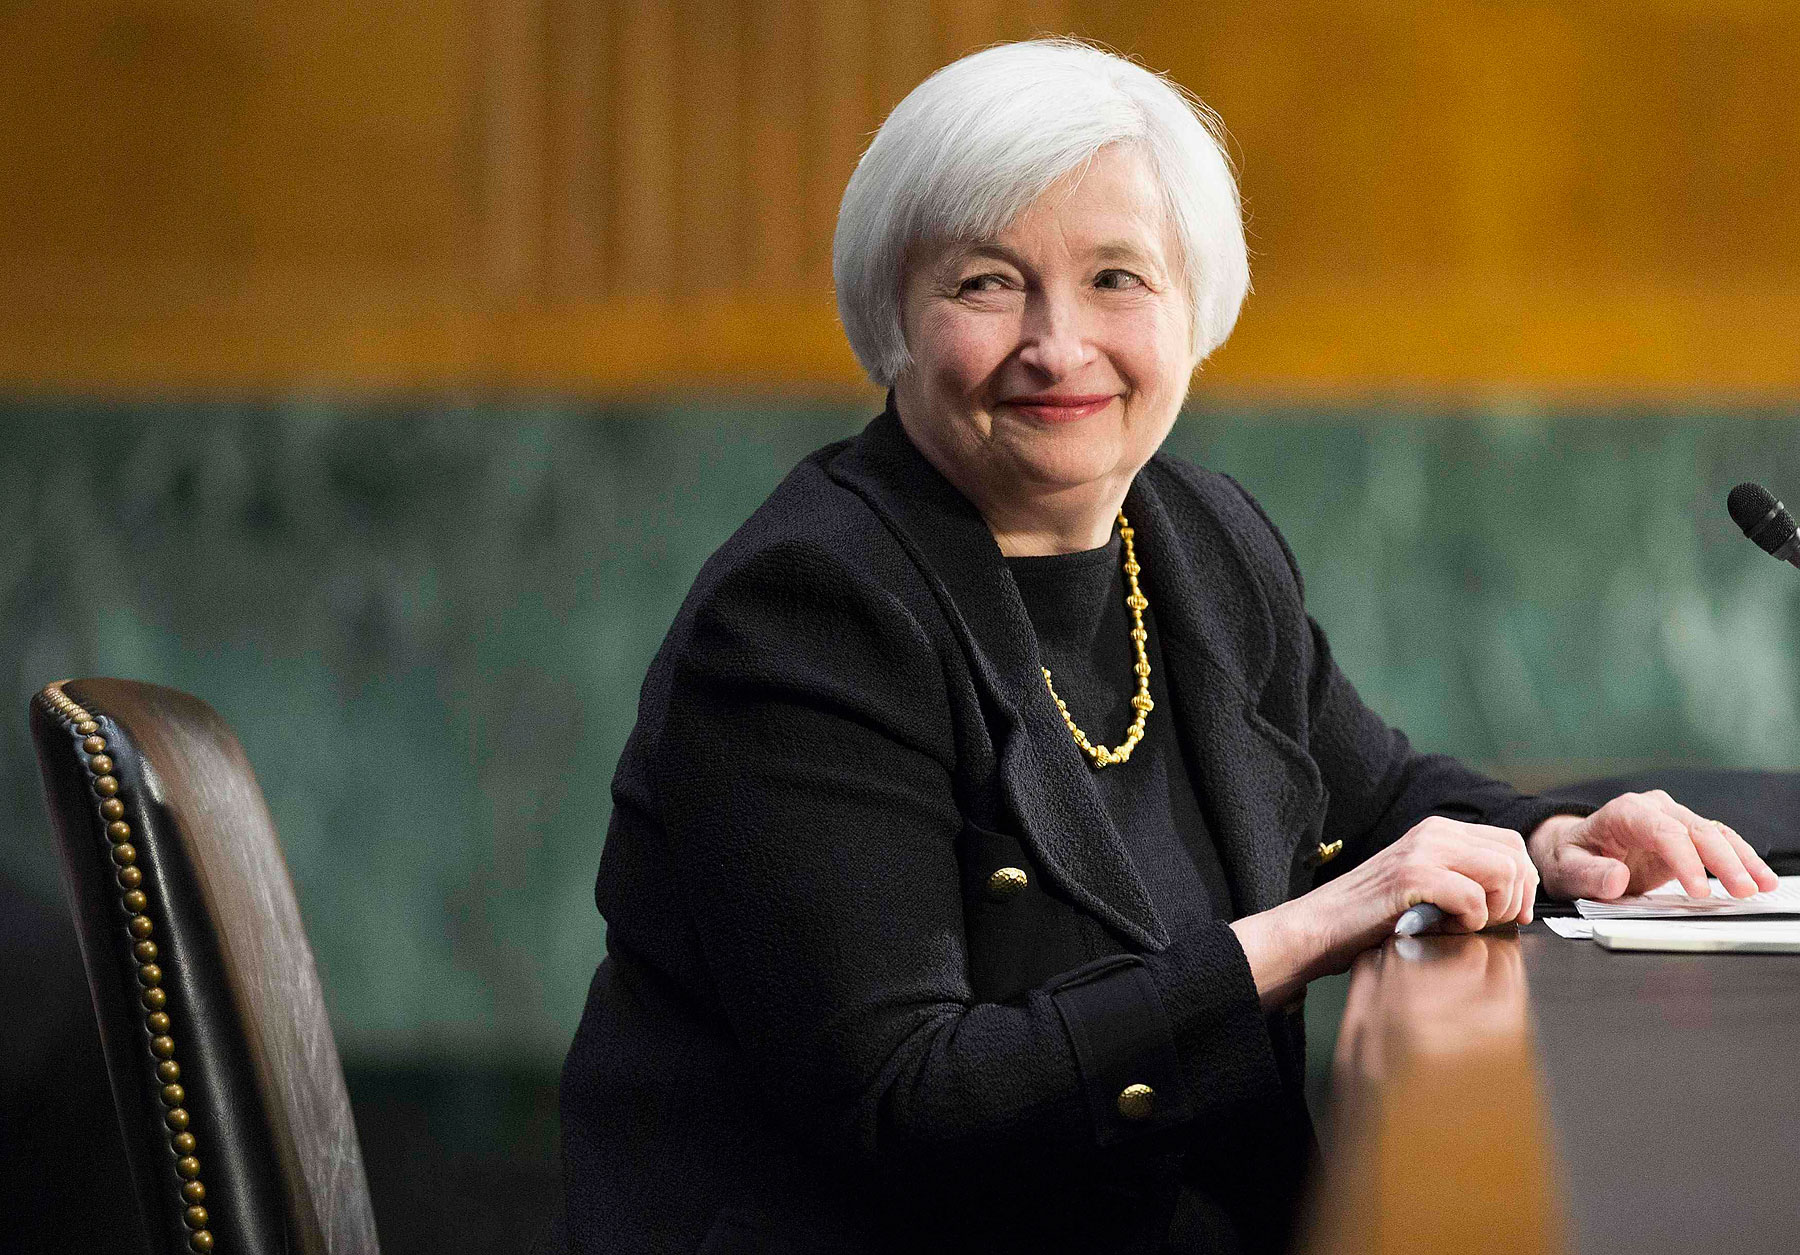 File photo of U.S. Federal Reserve Vice Chair Yellen testifying on her nomination to be the next chairman of the Fed during a Senate Banking Committee confirmation hearing in Washington